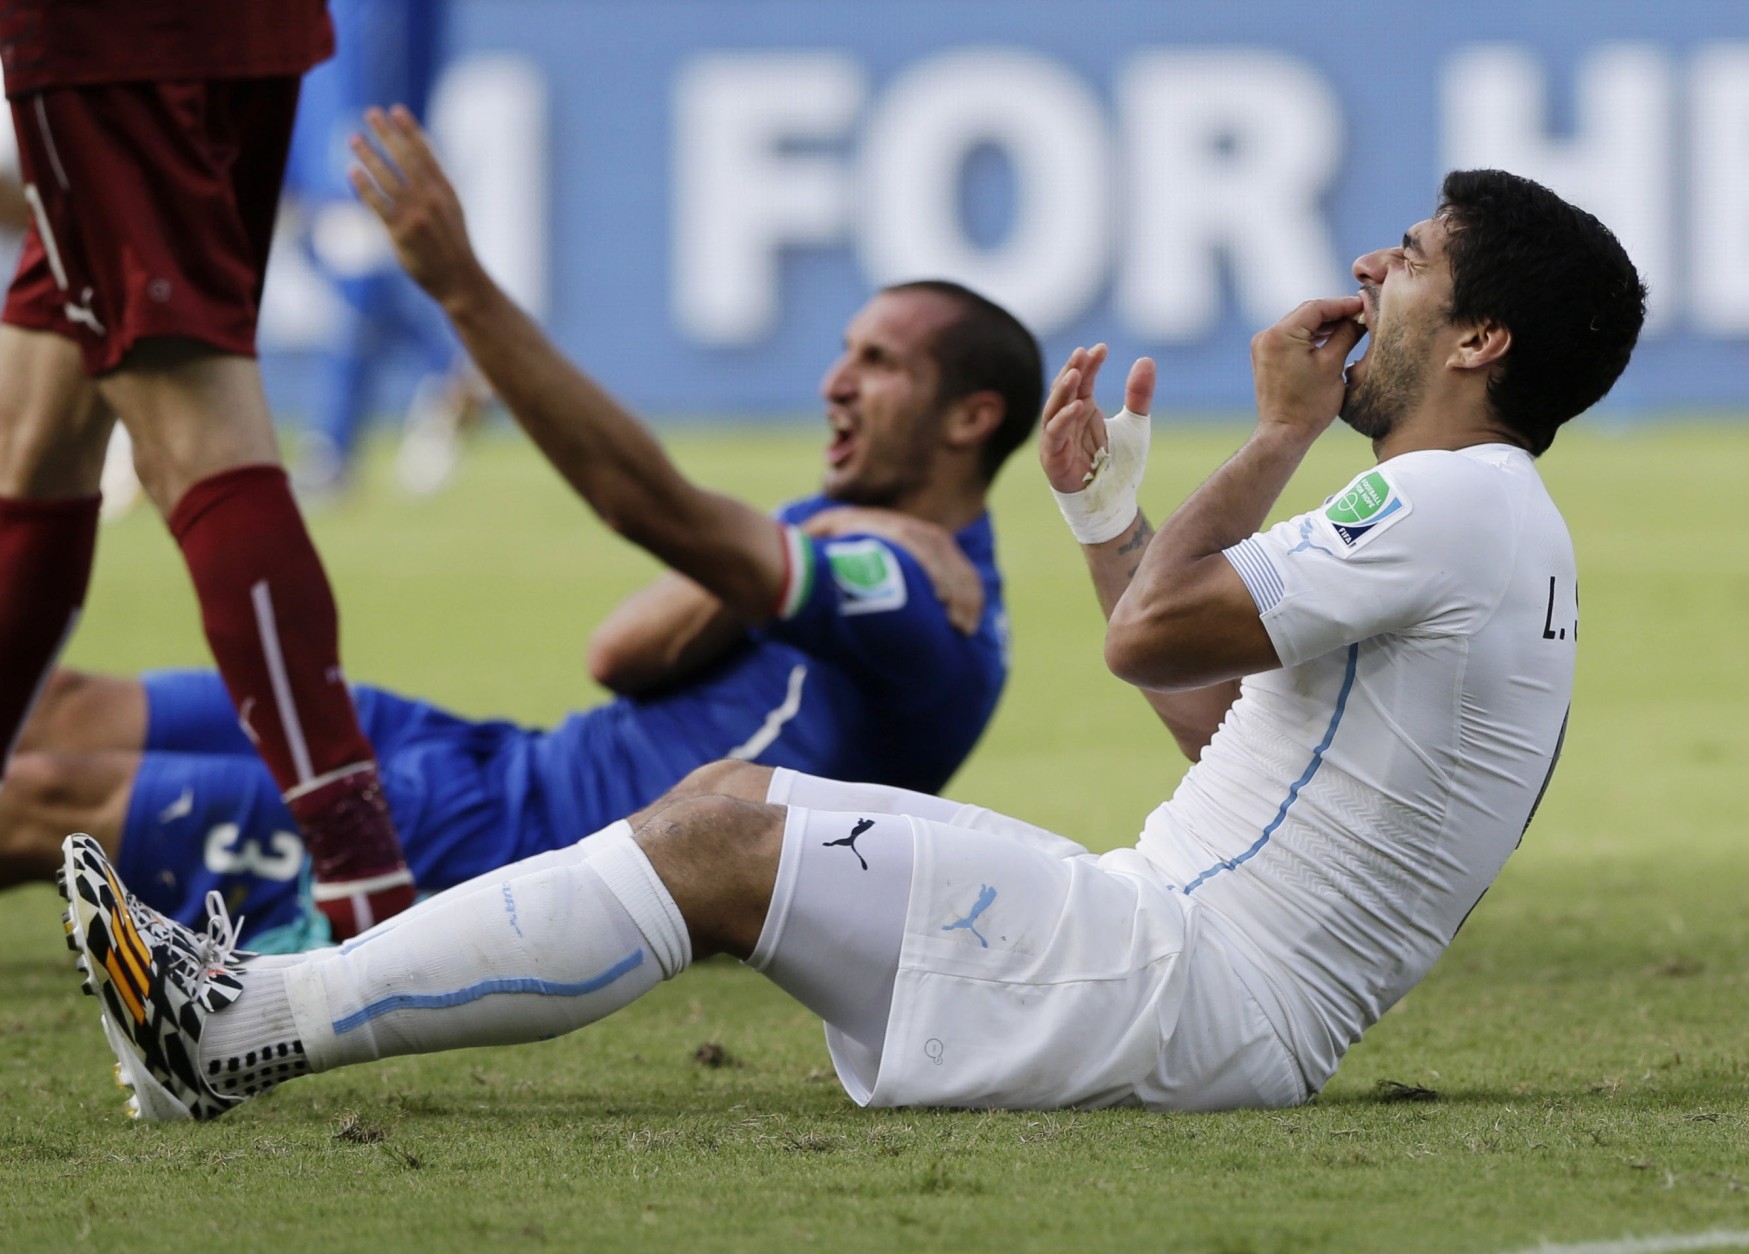 FOR USE AS DESIRED, YEAR END PHOTOS - FILE - Uruguay's Luis Suarez holds his teeth after running into Italy's Giorgio Chiellini's shoulder during the group D World Cup soccer match between Italy and Uruguay at the Arena das Dunas in Natal, Brazil, Tuesday, June 24, 2014. (AP Photo/Ricardo Mazalan, File)